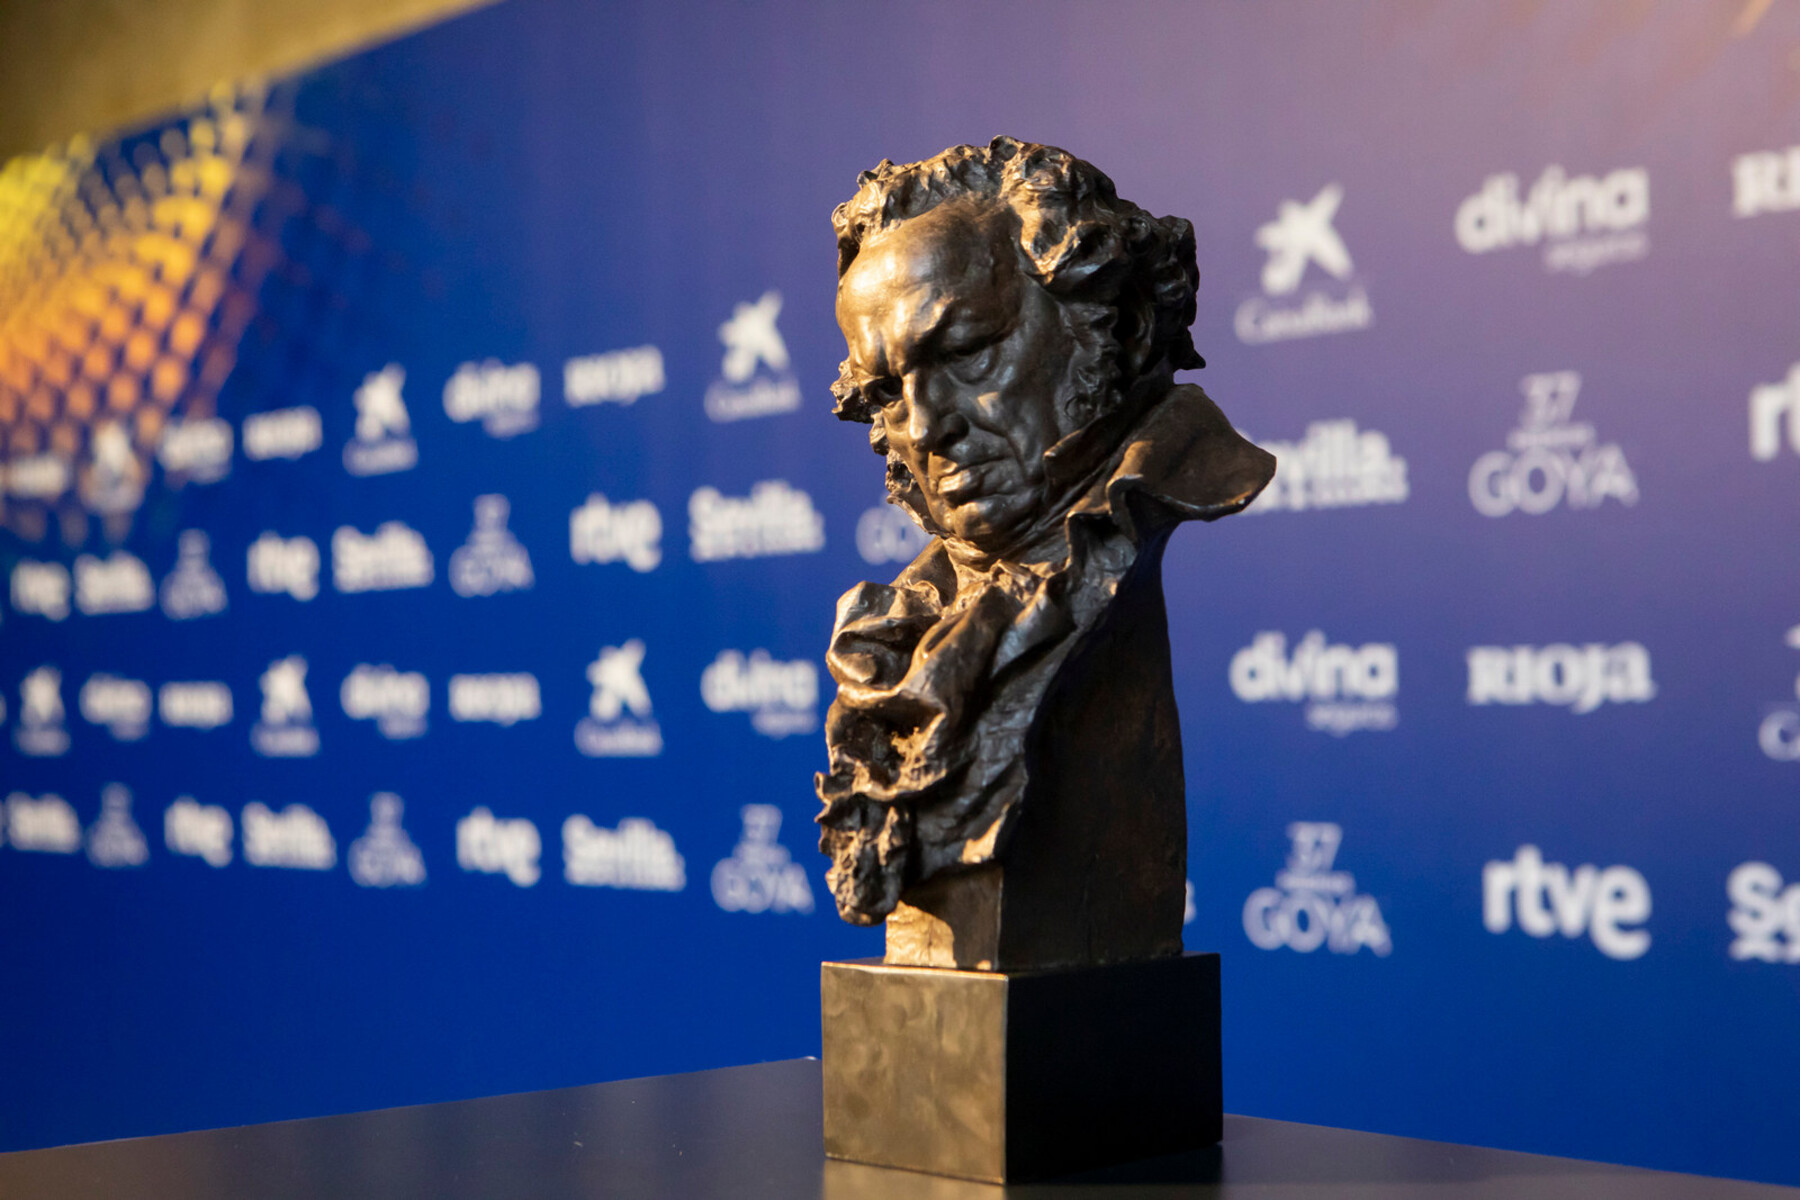 17-facts-about-goya-awards